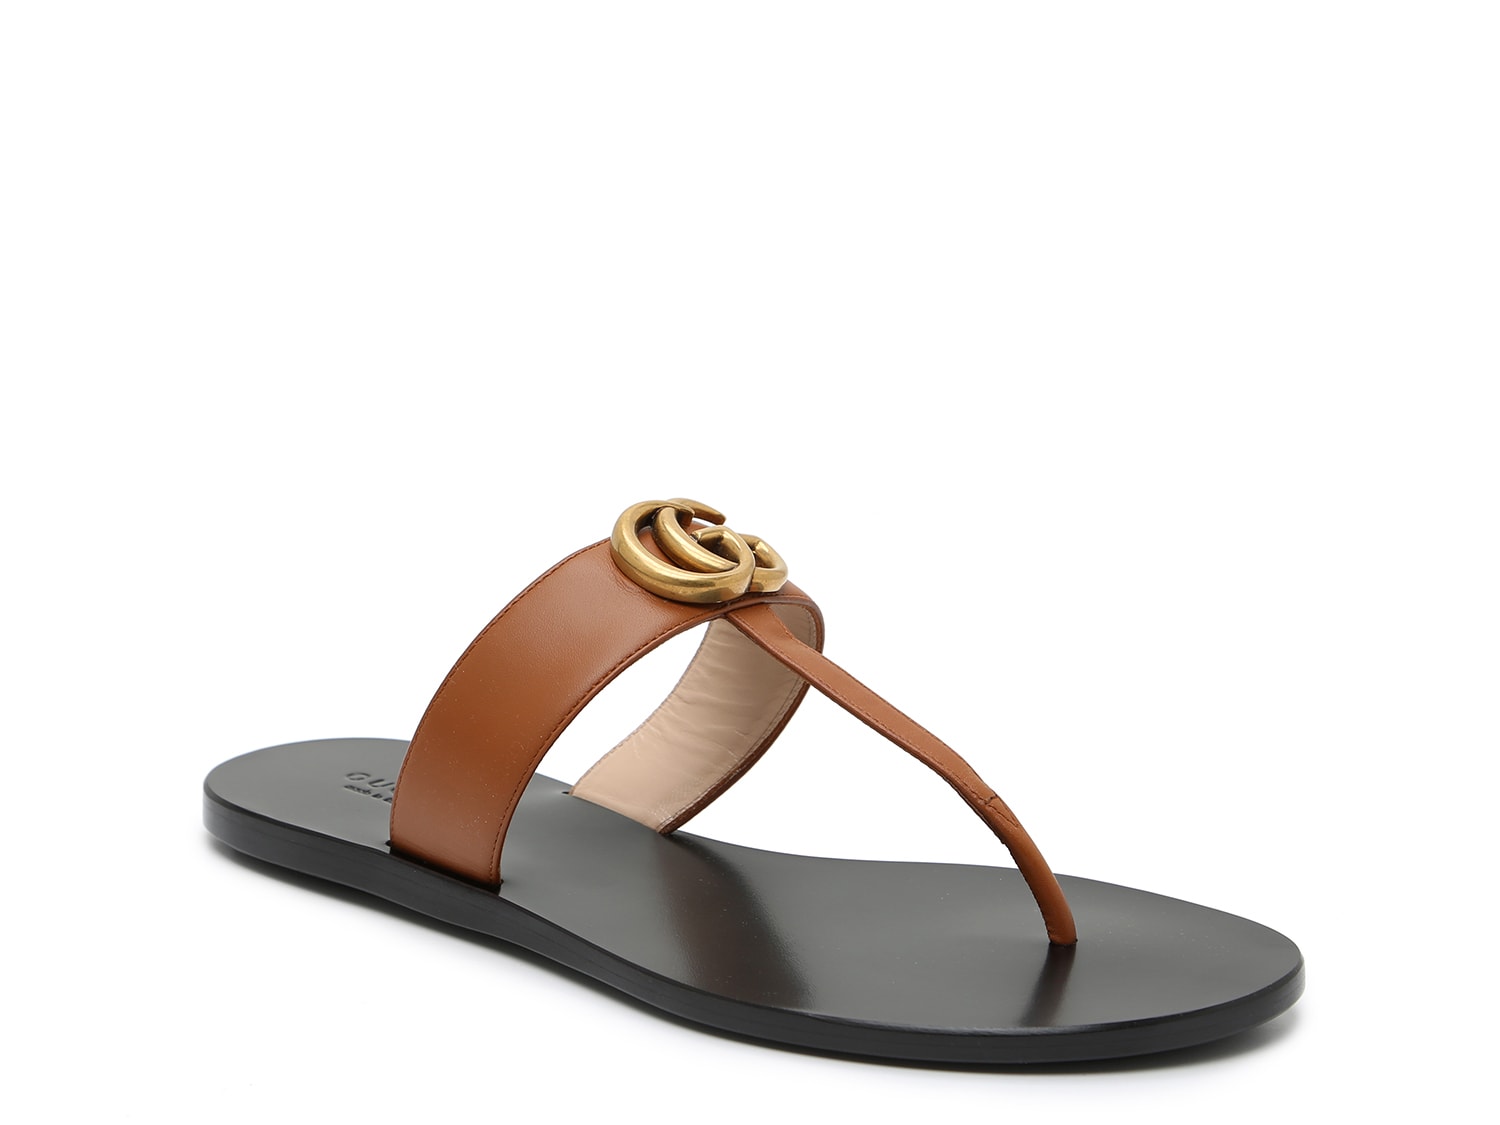 Gucci Marmont Sandal - Free Shipping | DSW